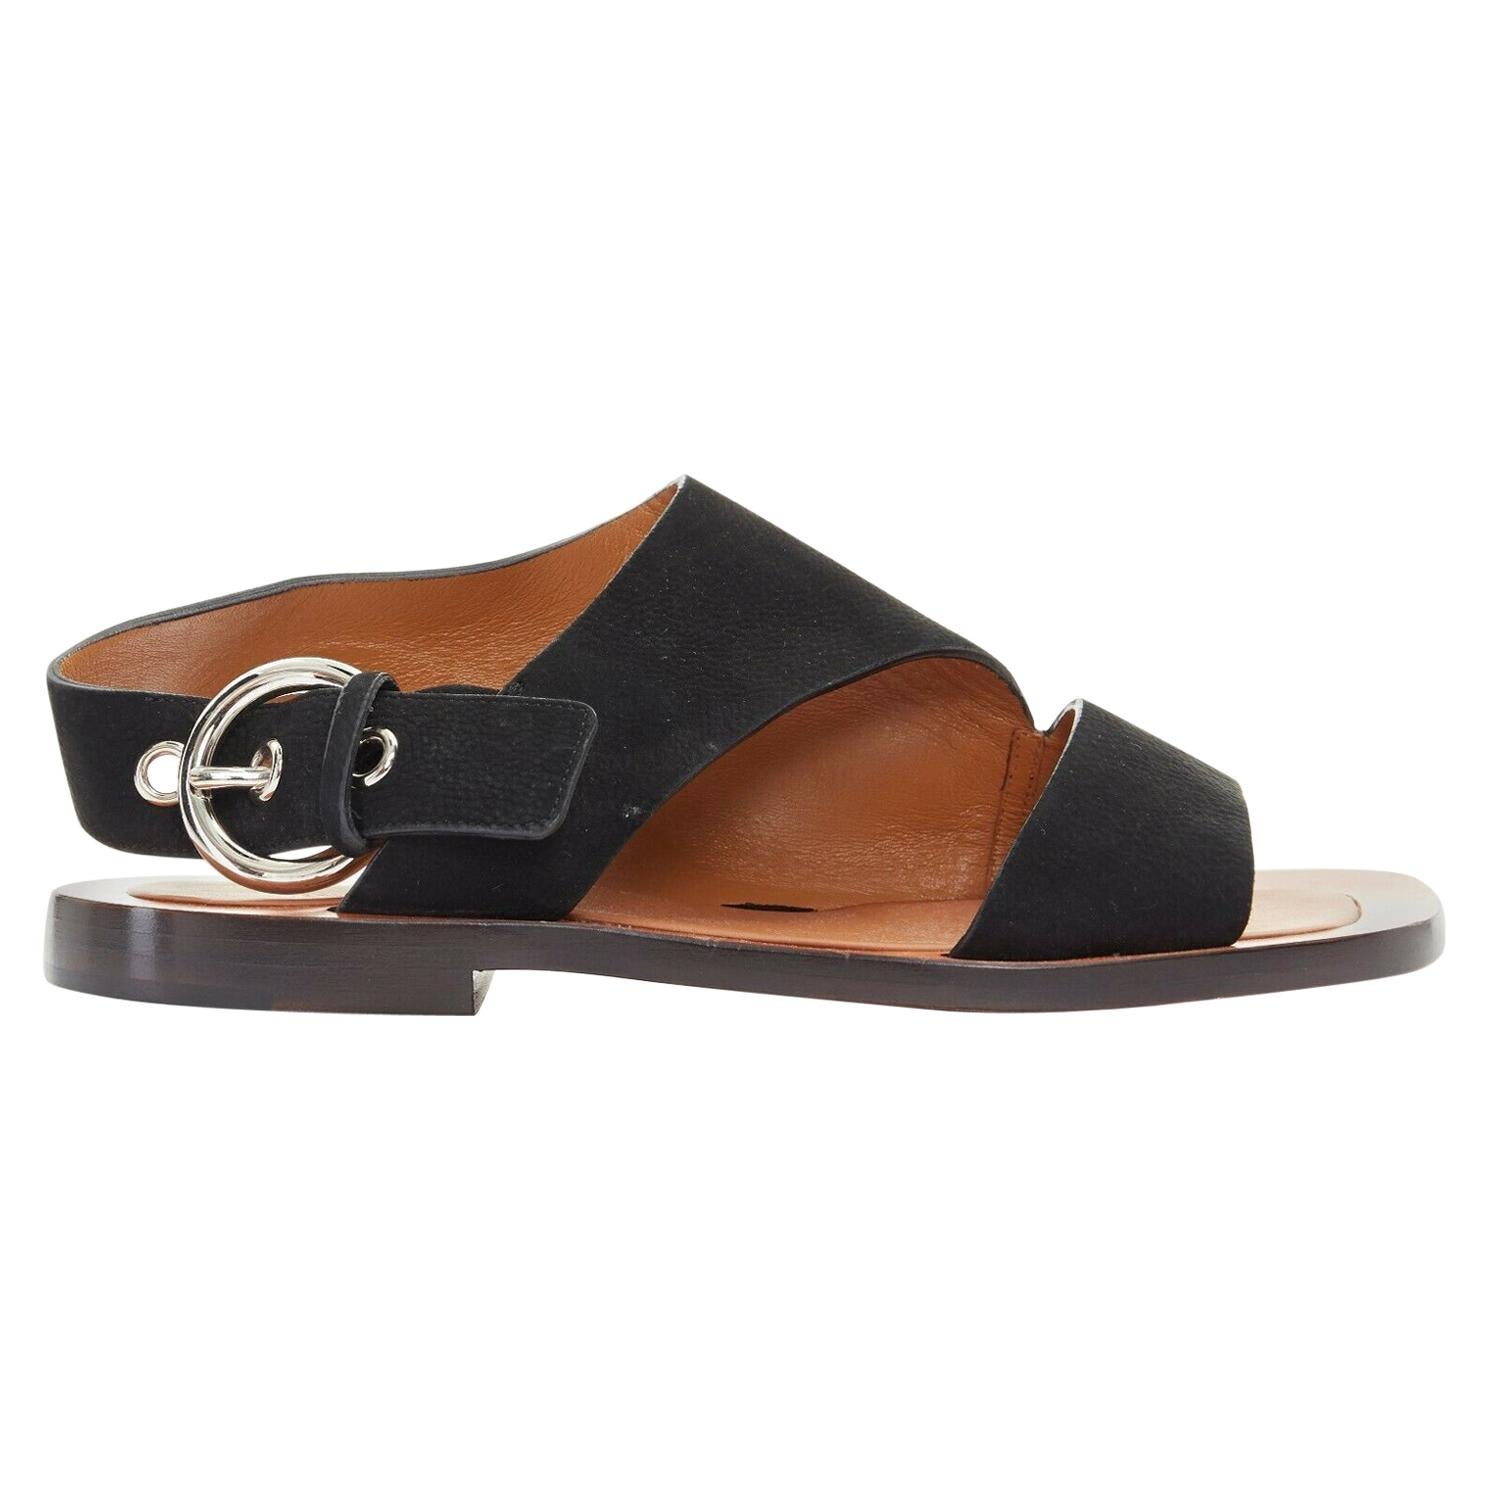 silver buckle sandals